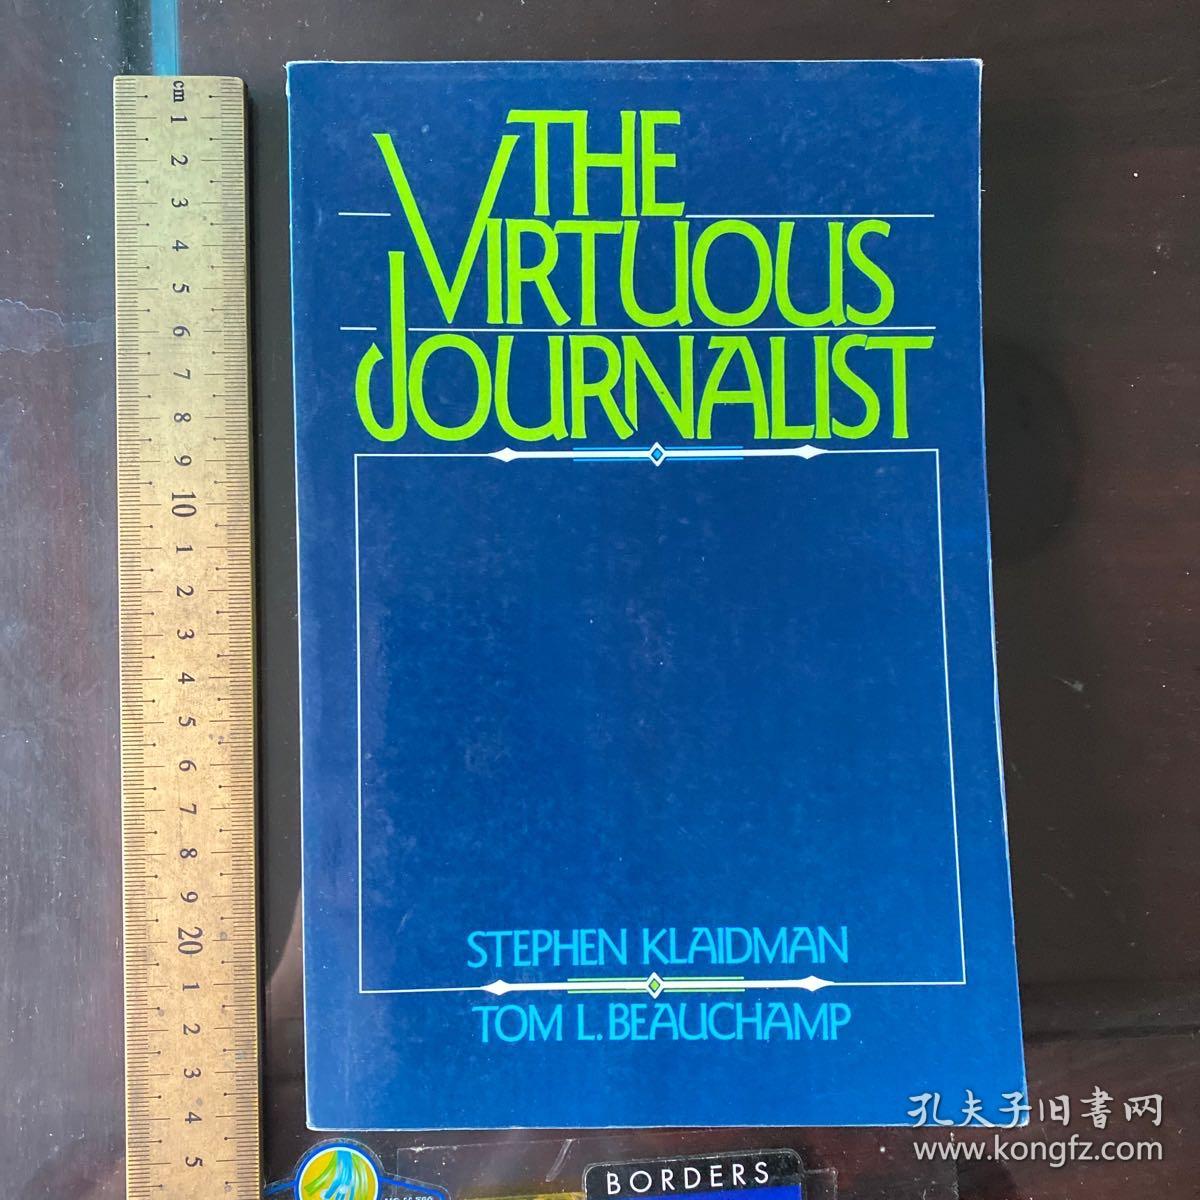 The virtuous journalist journalism history media and philosophy 英文原版